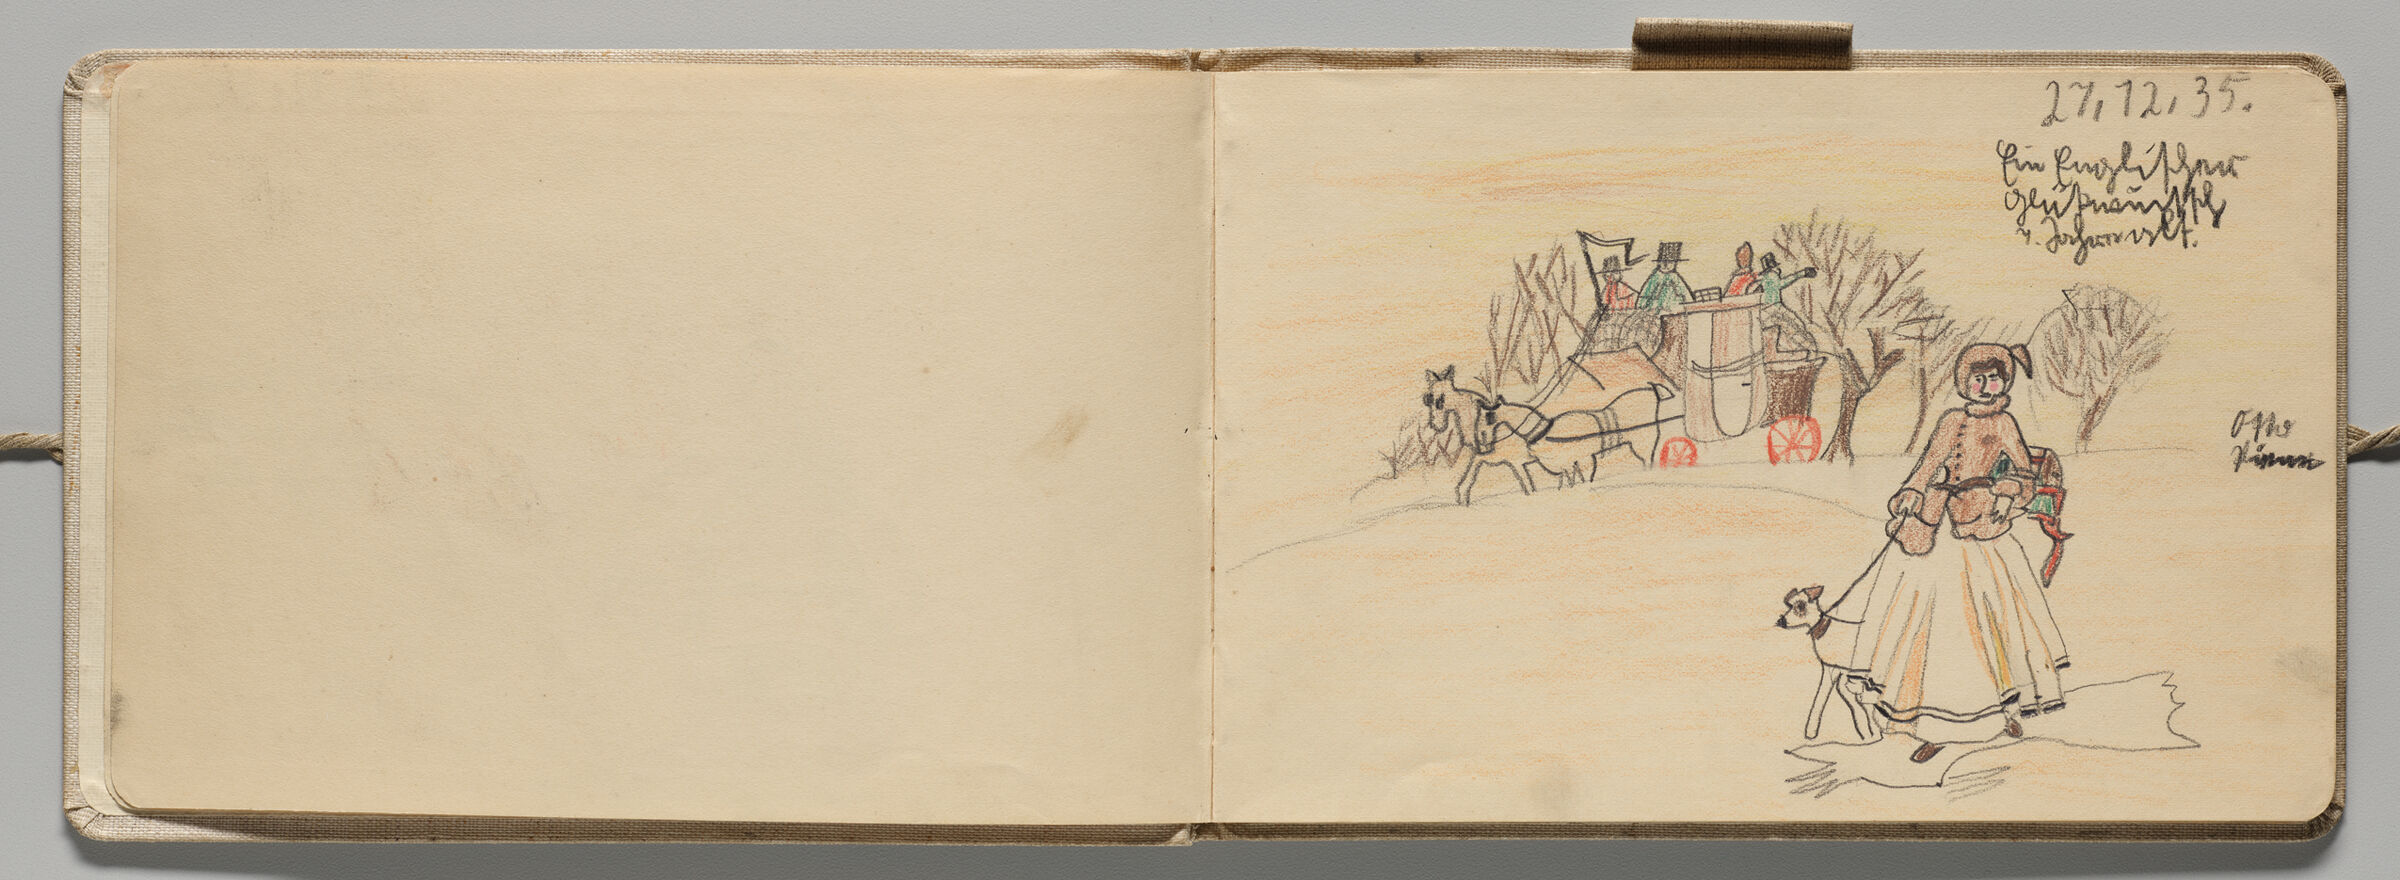 Untitled (Blank, Left Page); Untitled (Winter Landscape With Horse-Drawn Carriage And Woman Walking Dog, Right Page)